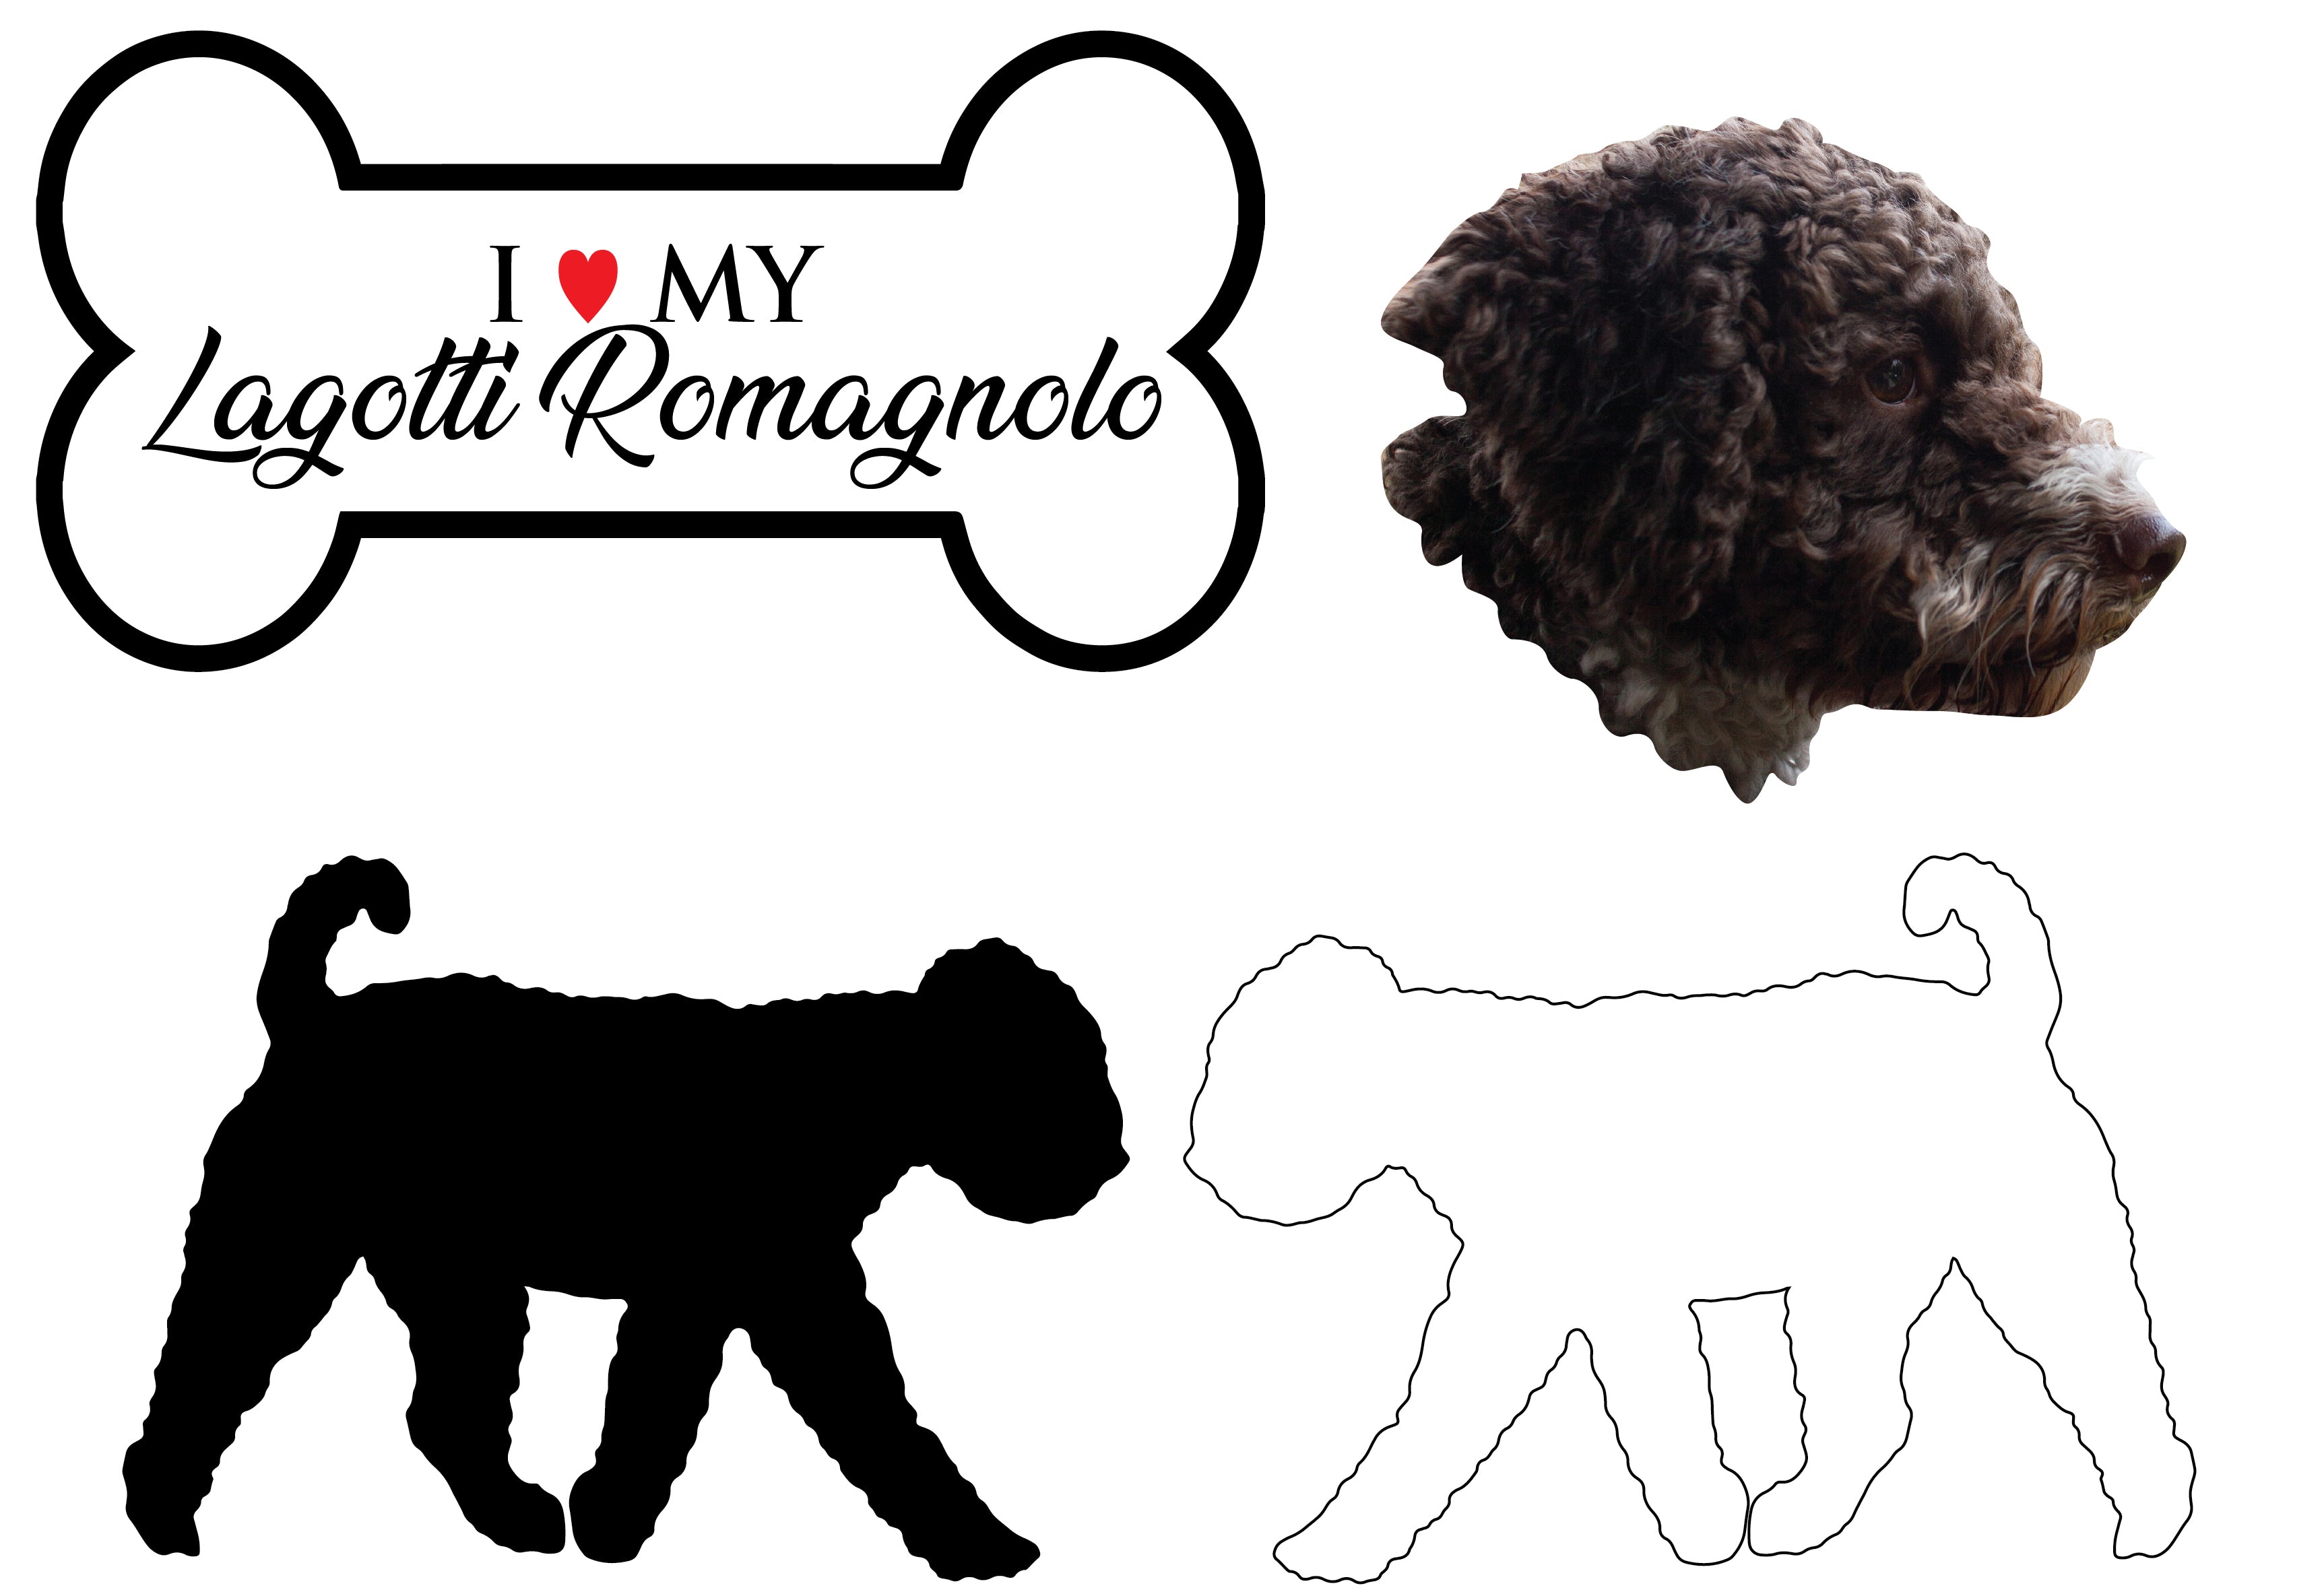 Lagotti Romagnolo - Dog Breed Decals (Set of 16) - Sizes in Description